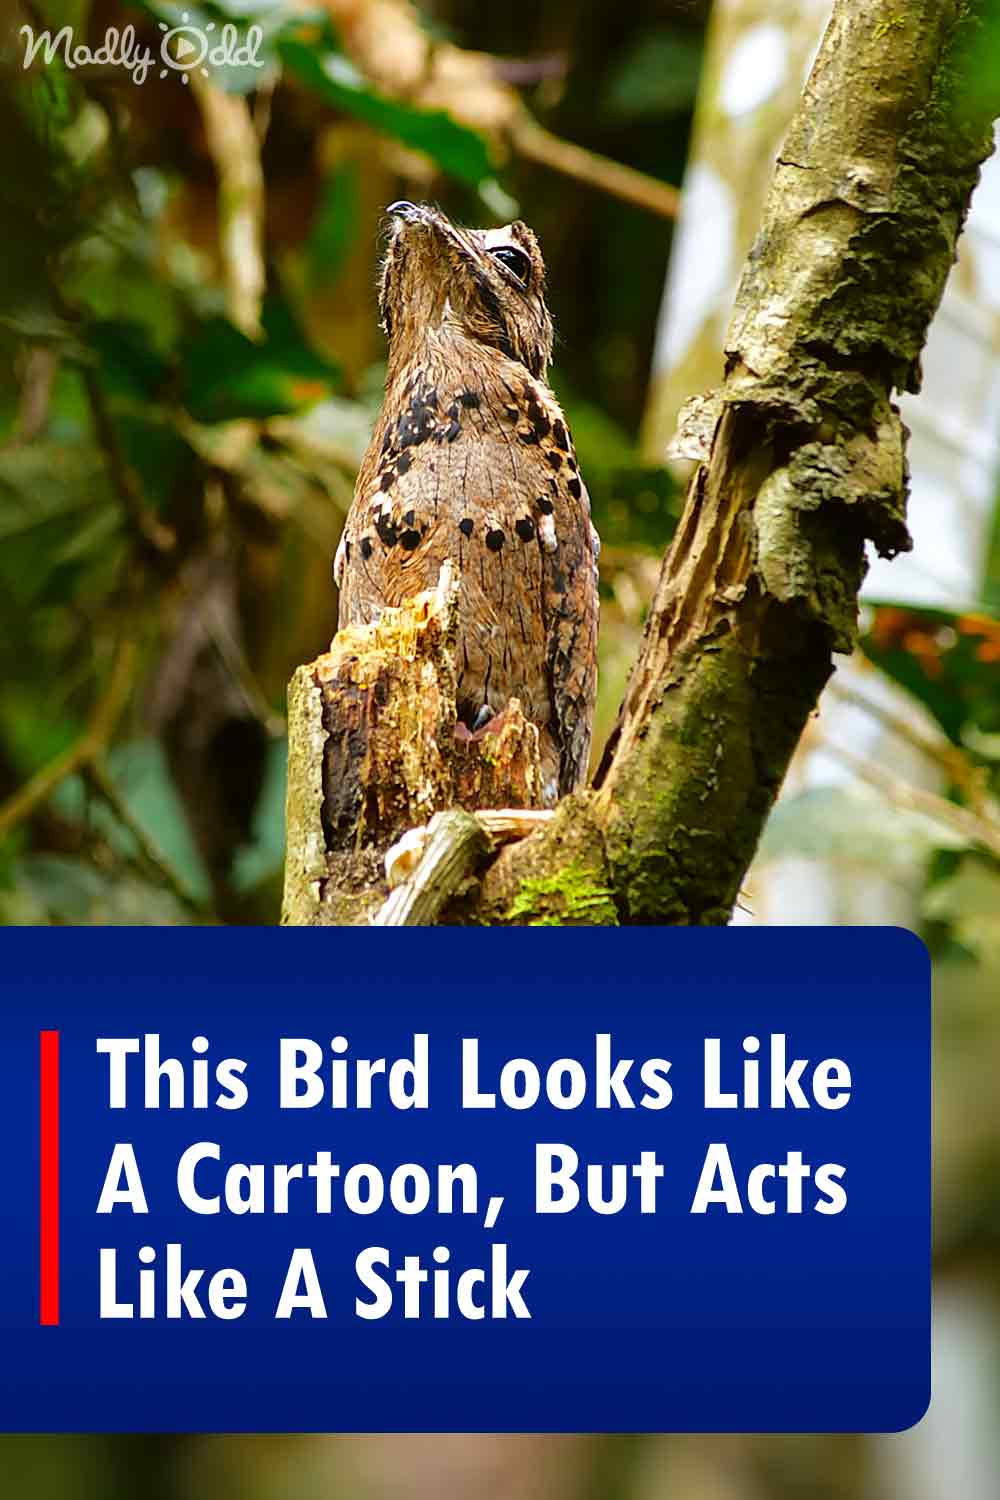 This Bird Looks Like A Cartoon, But Acts Like A Stick